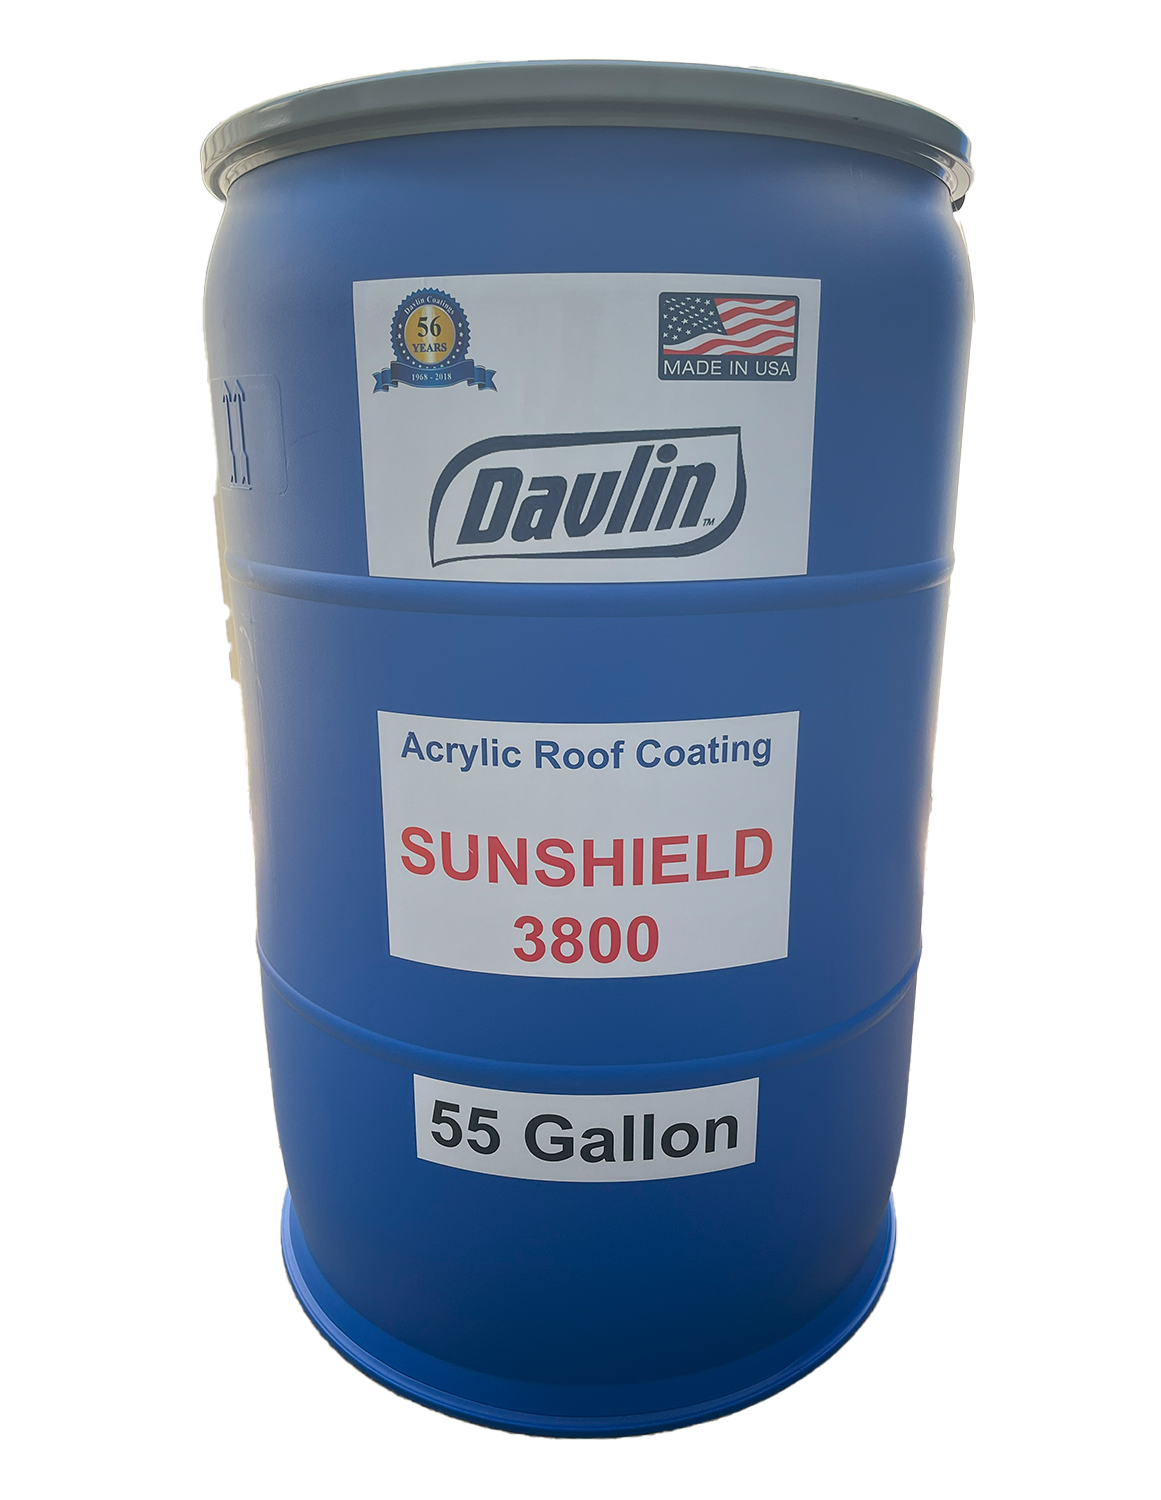 UV Resistant Paint - SunShield 3800 - 5 Gal - Free Shipping - Reflective Paint - Free Sample